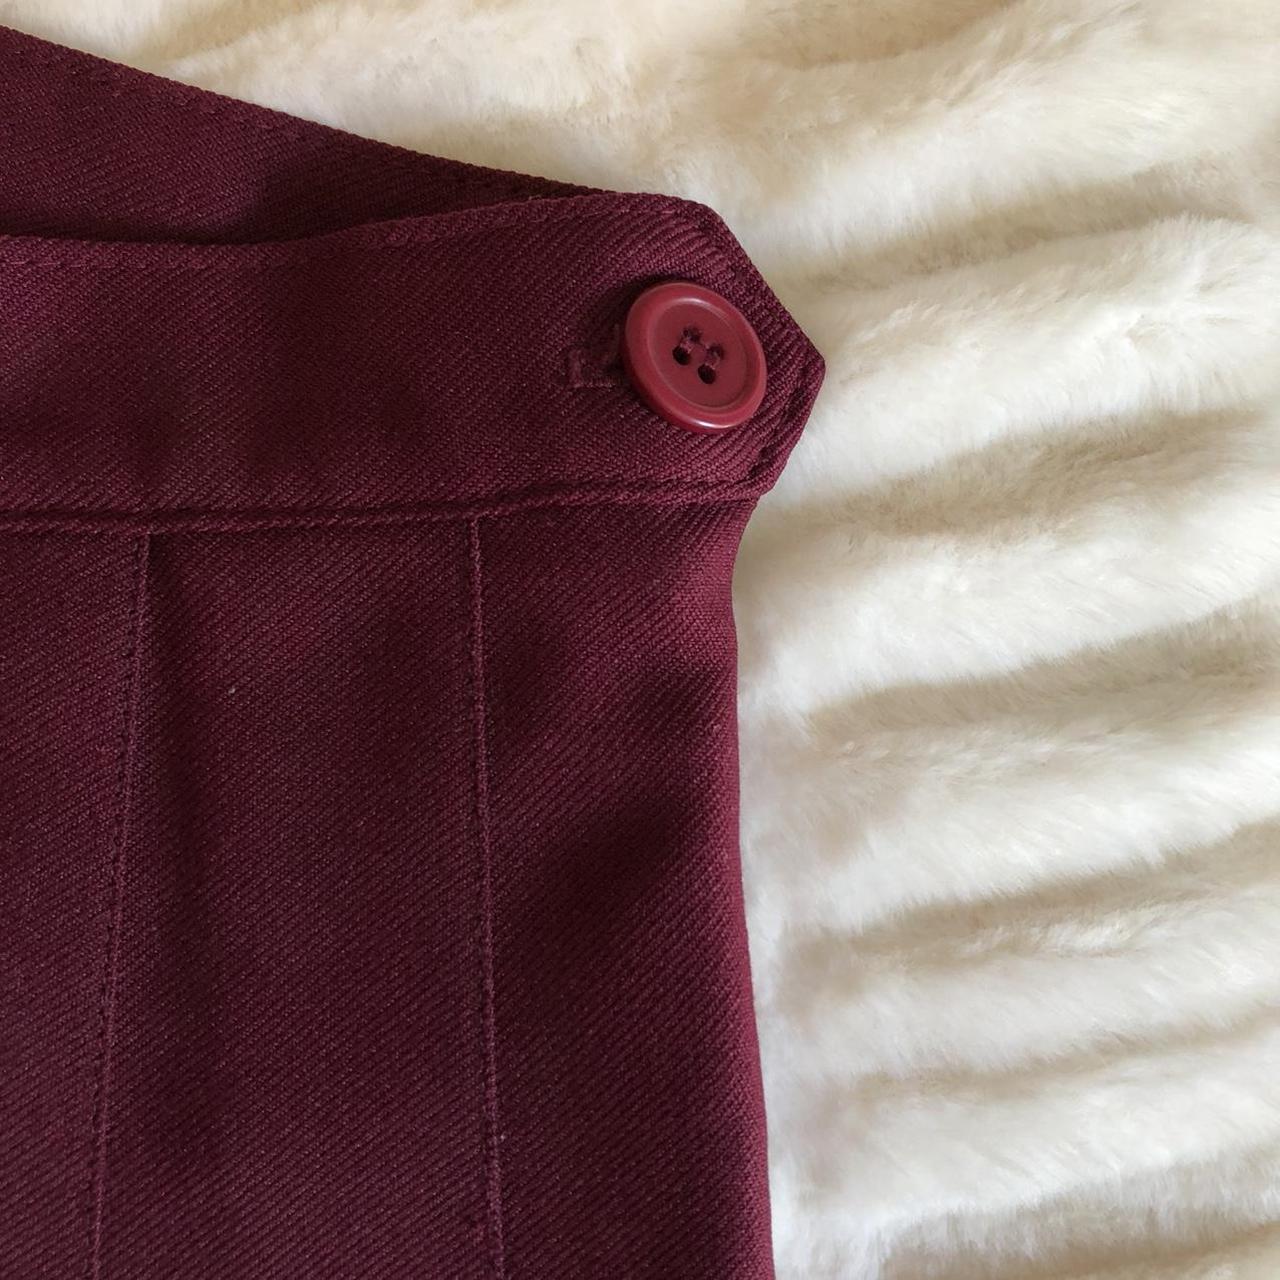 American Apparel Women's Burgundy and Red Skirt (4)